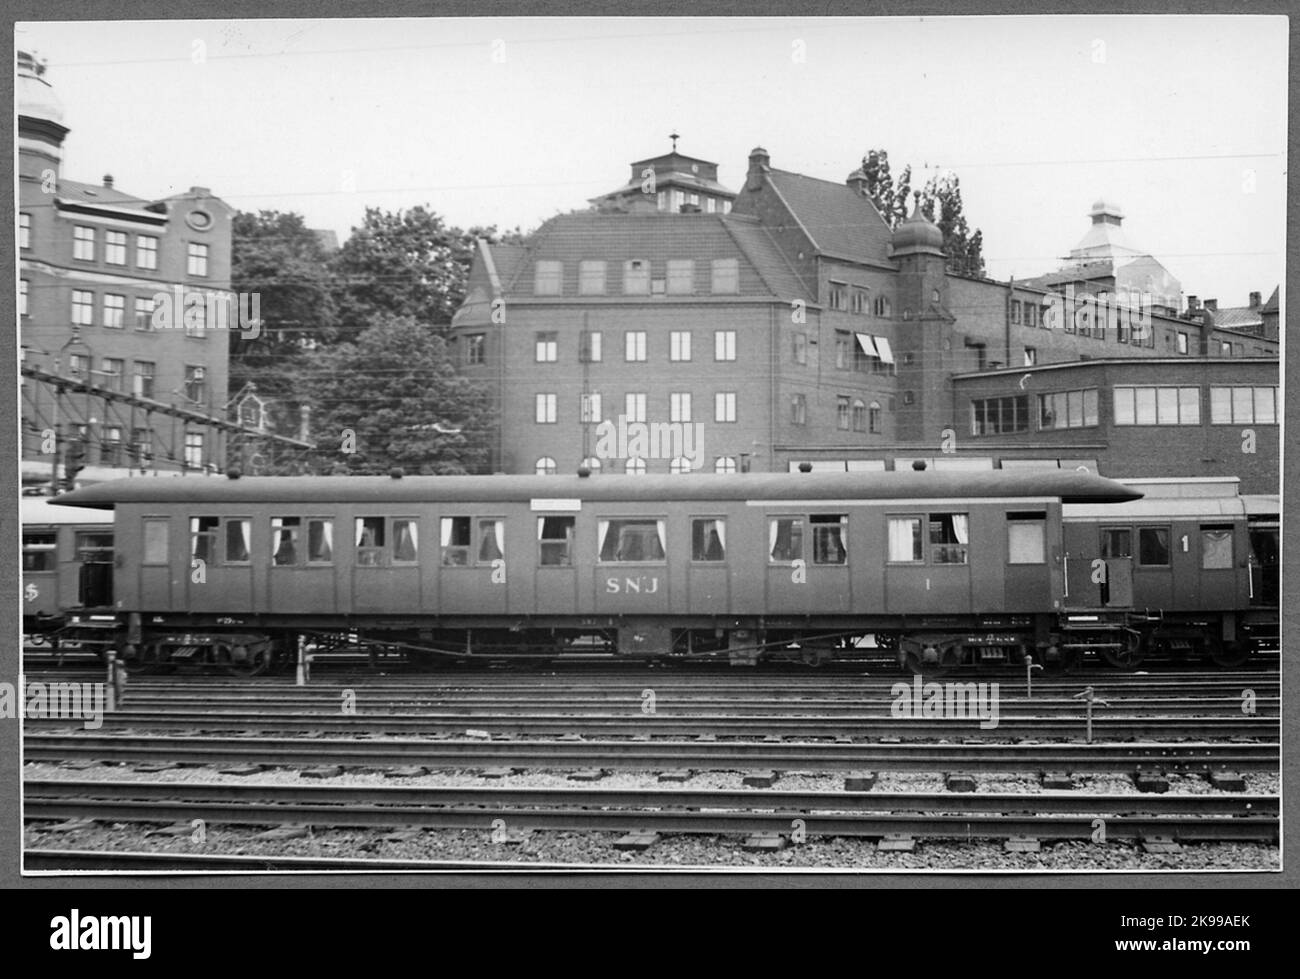 Stockholm-Nynäs Railway, SNJ BCO 1 on track at Stockholm Central Station. Stock Photo